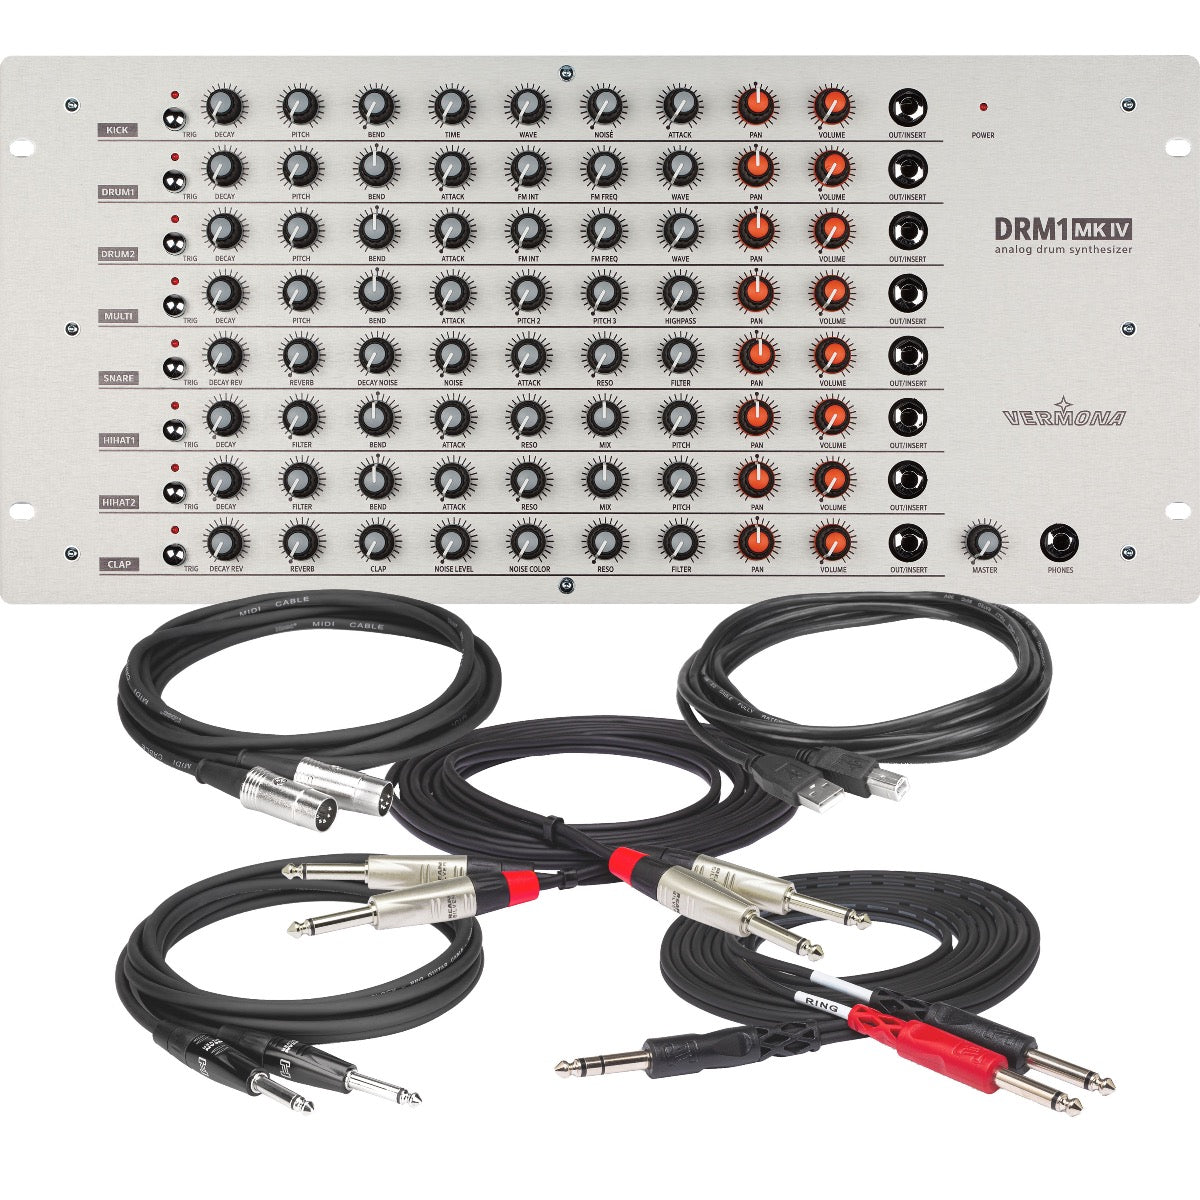 Bundle collage image of Vermona DRM1 MKIV Analog Drum Synthesizer with Trigger Inputs CABLE KIT bundle